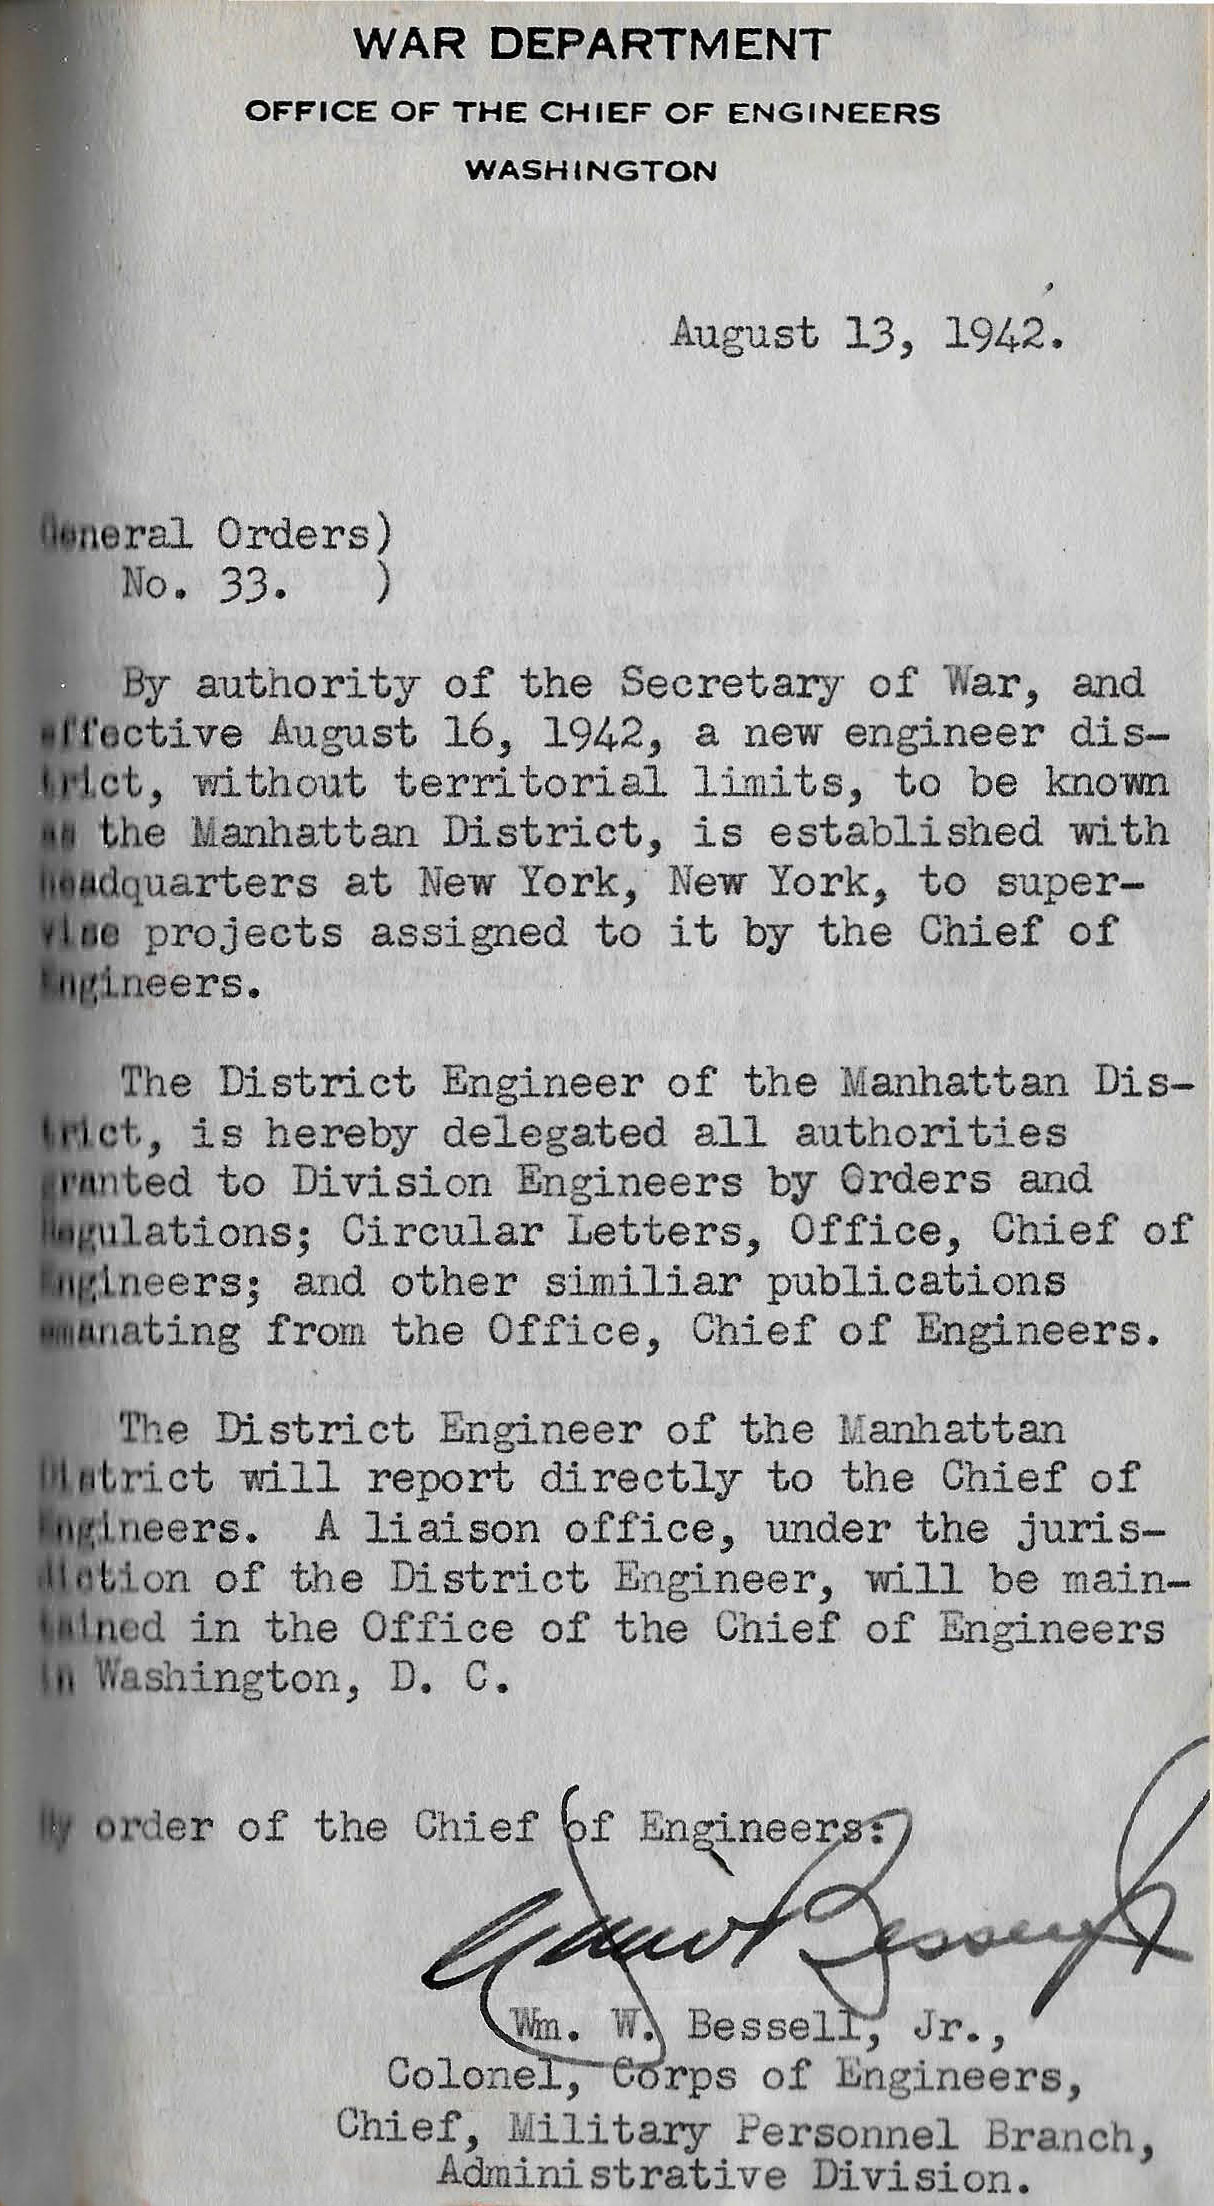 Image of a typewritten and signed order establishing the Manhattan Engineer District